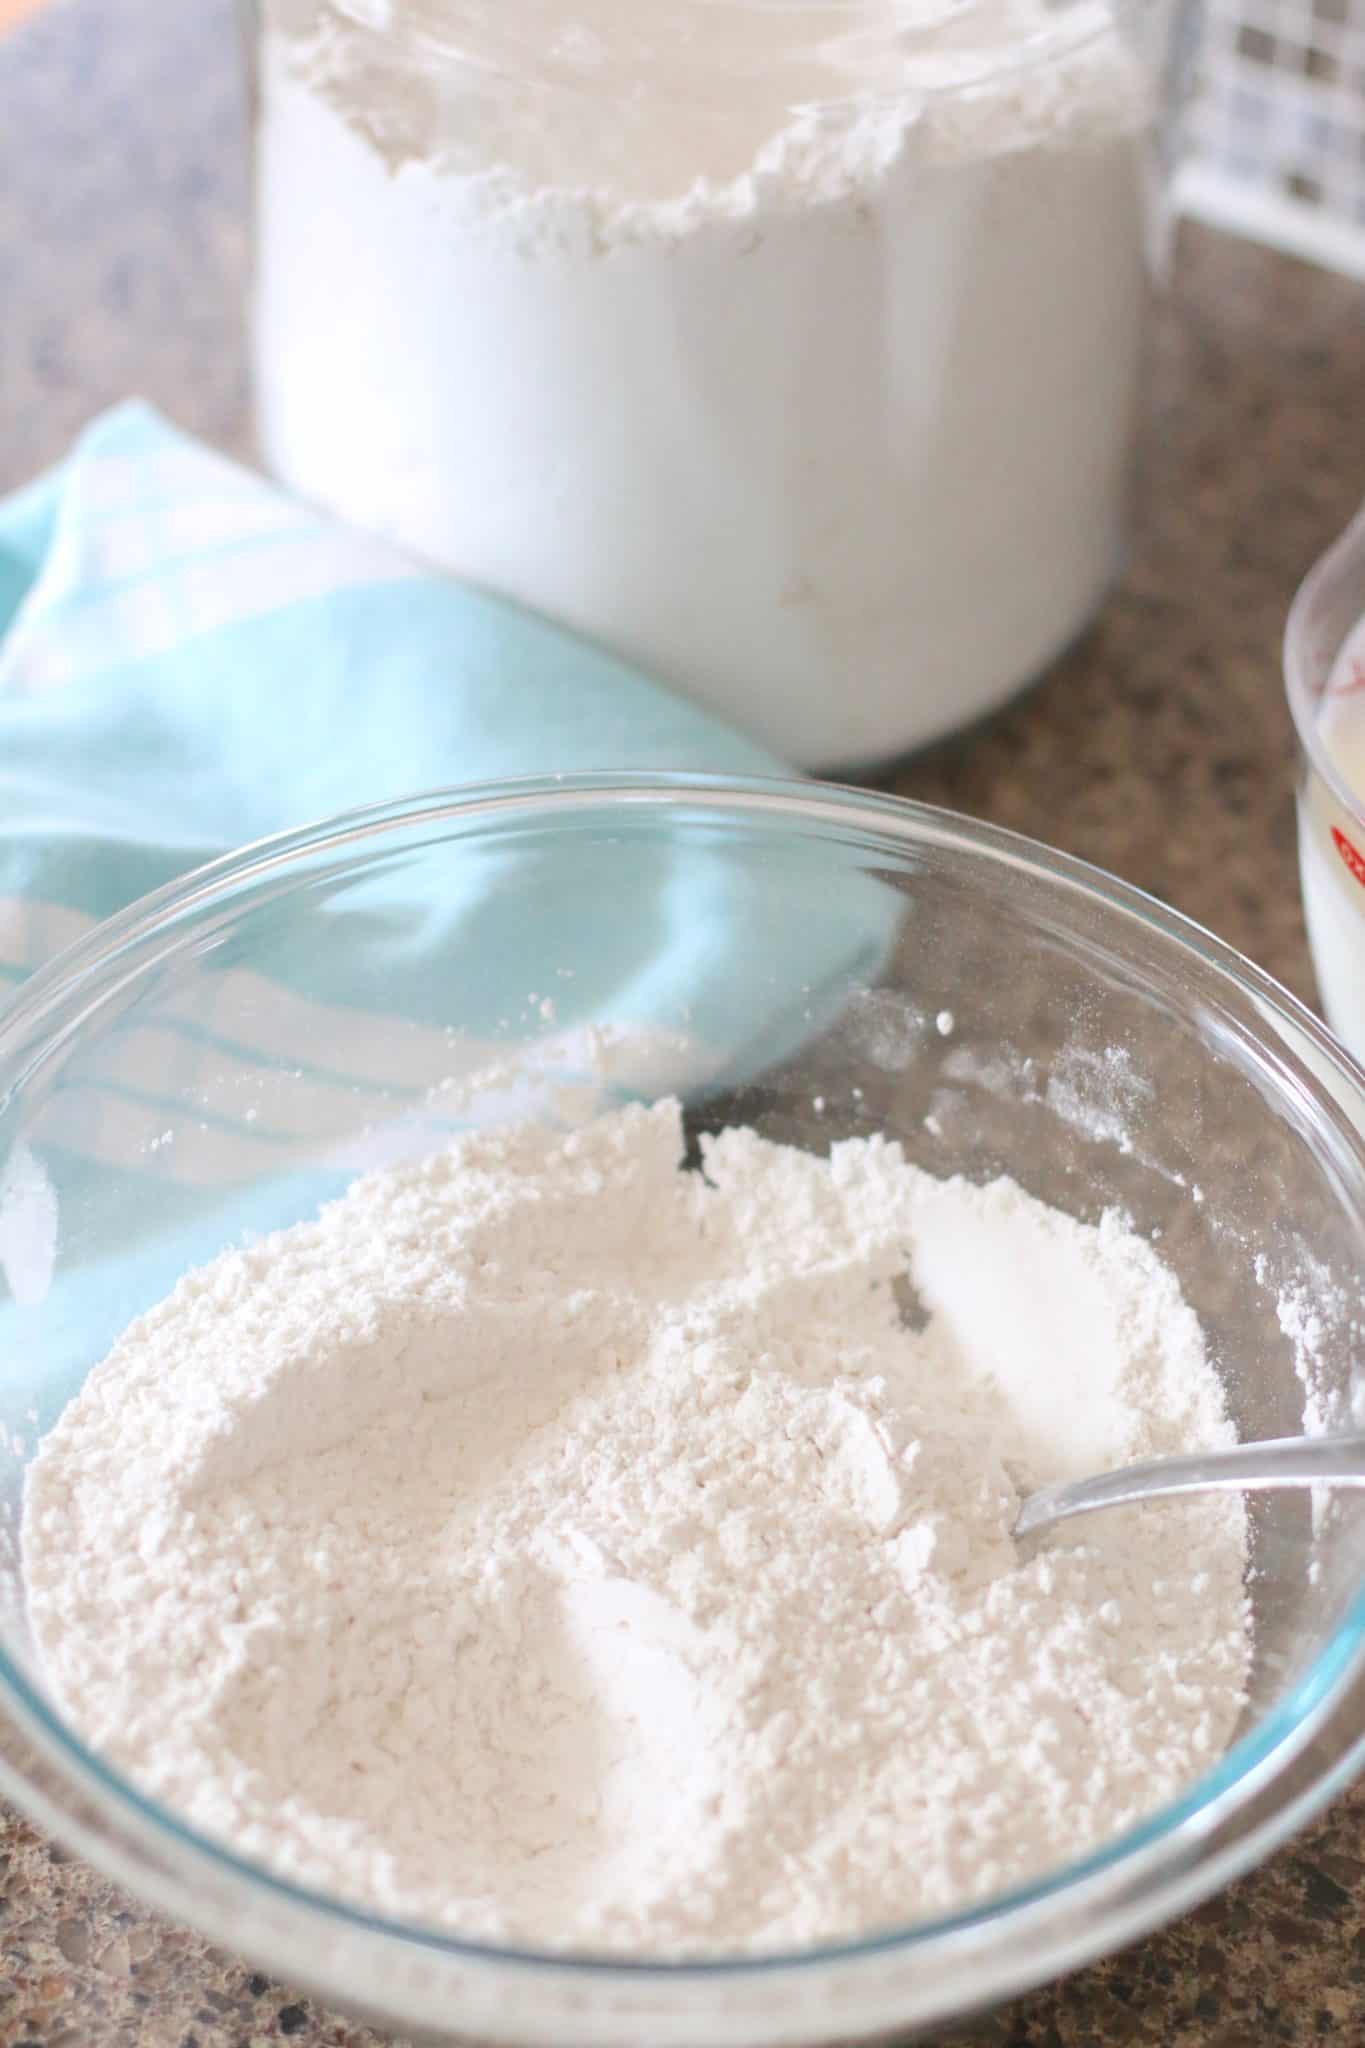 All-purpose flour, baking powder, salt stirred together in a glass Pyrex bowl stirred with a fork.